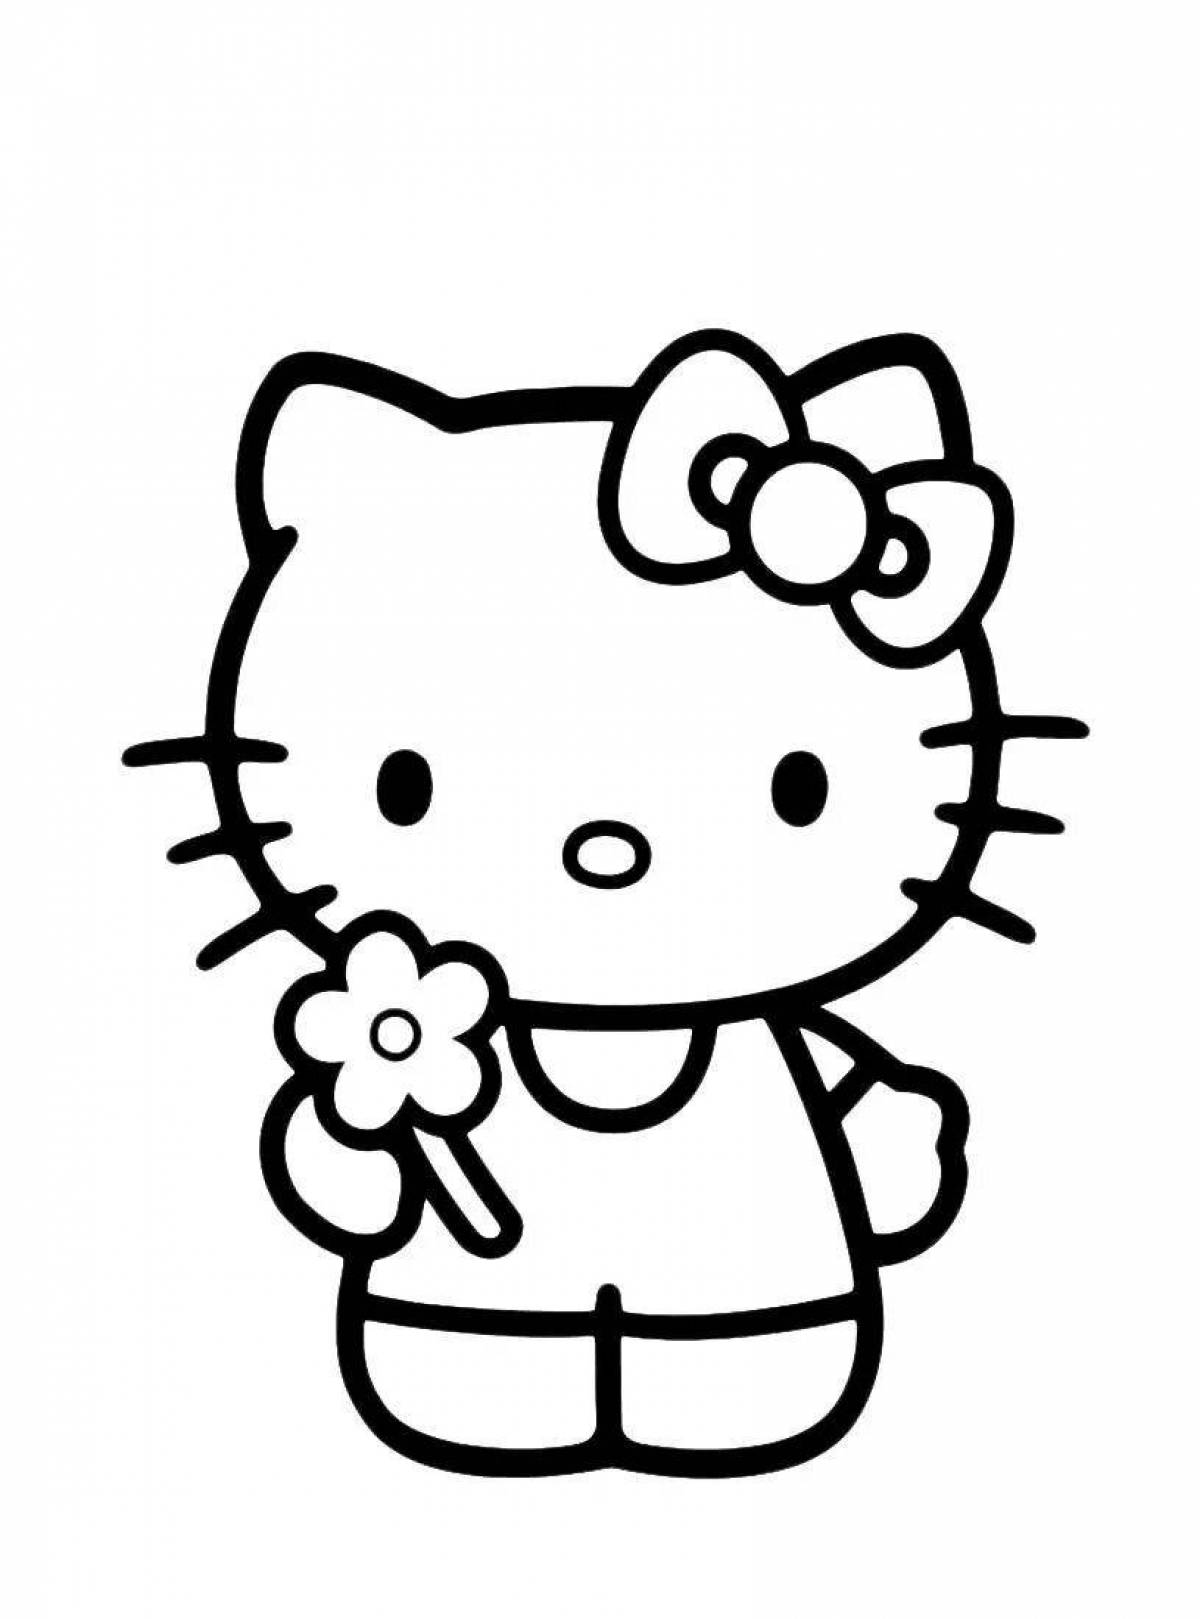 With hello kitty small #2